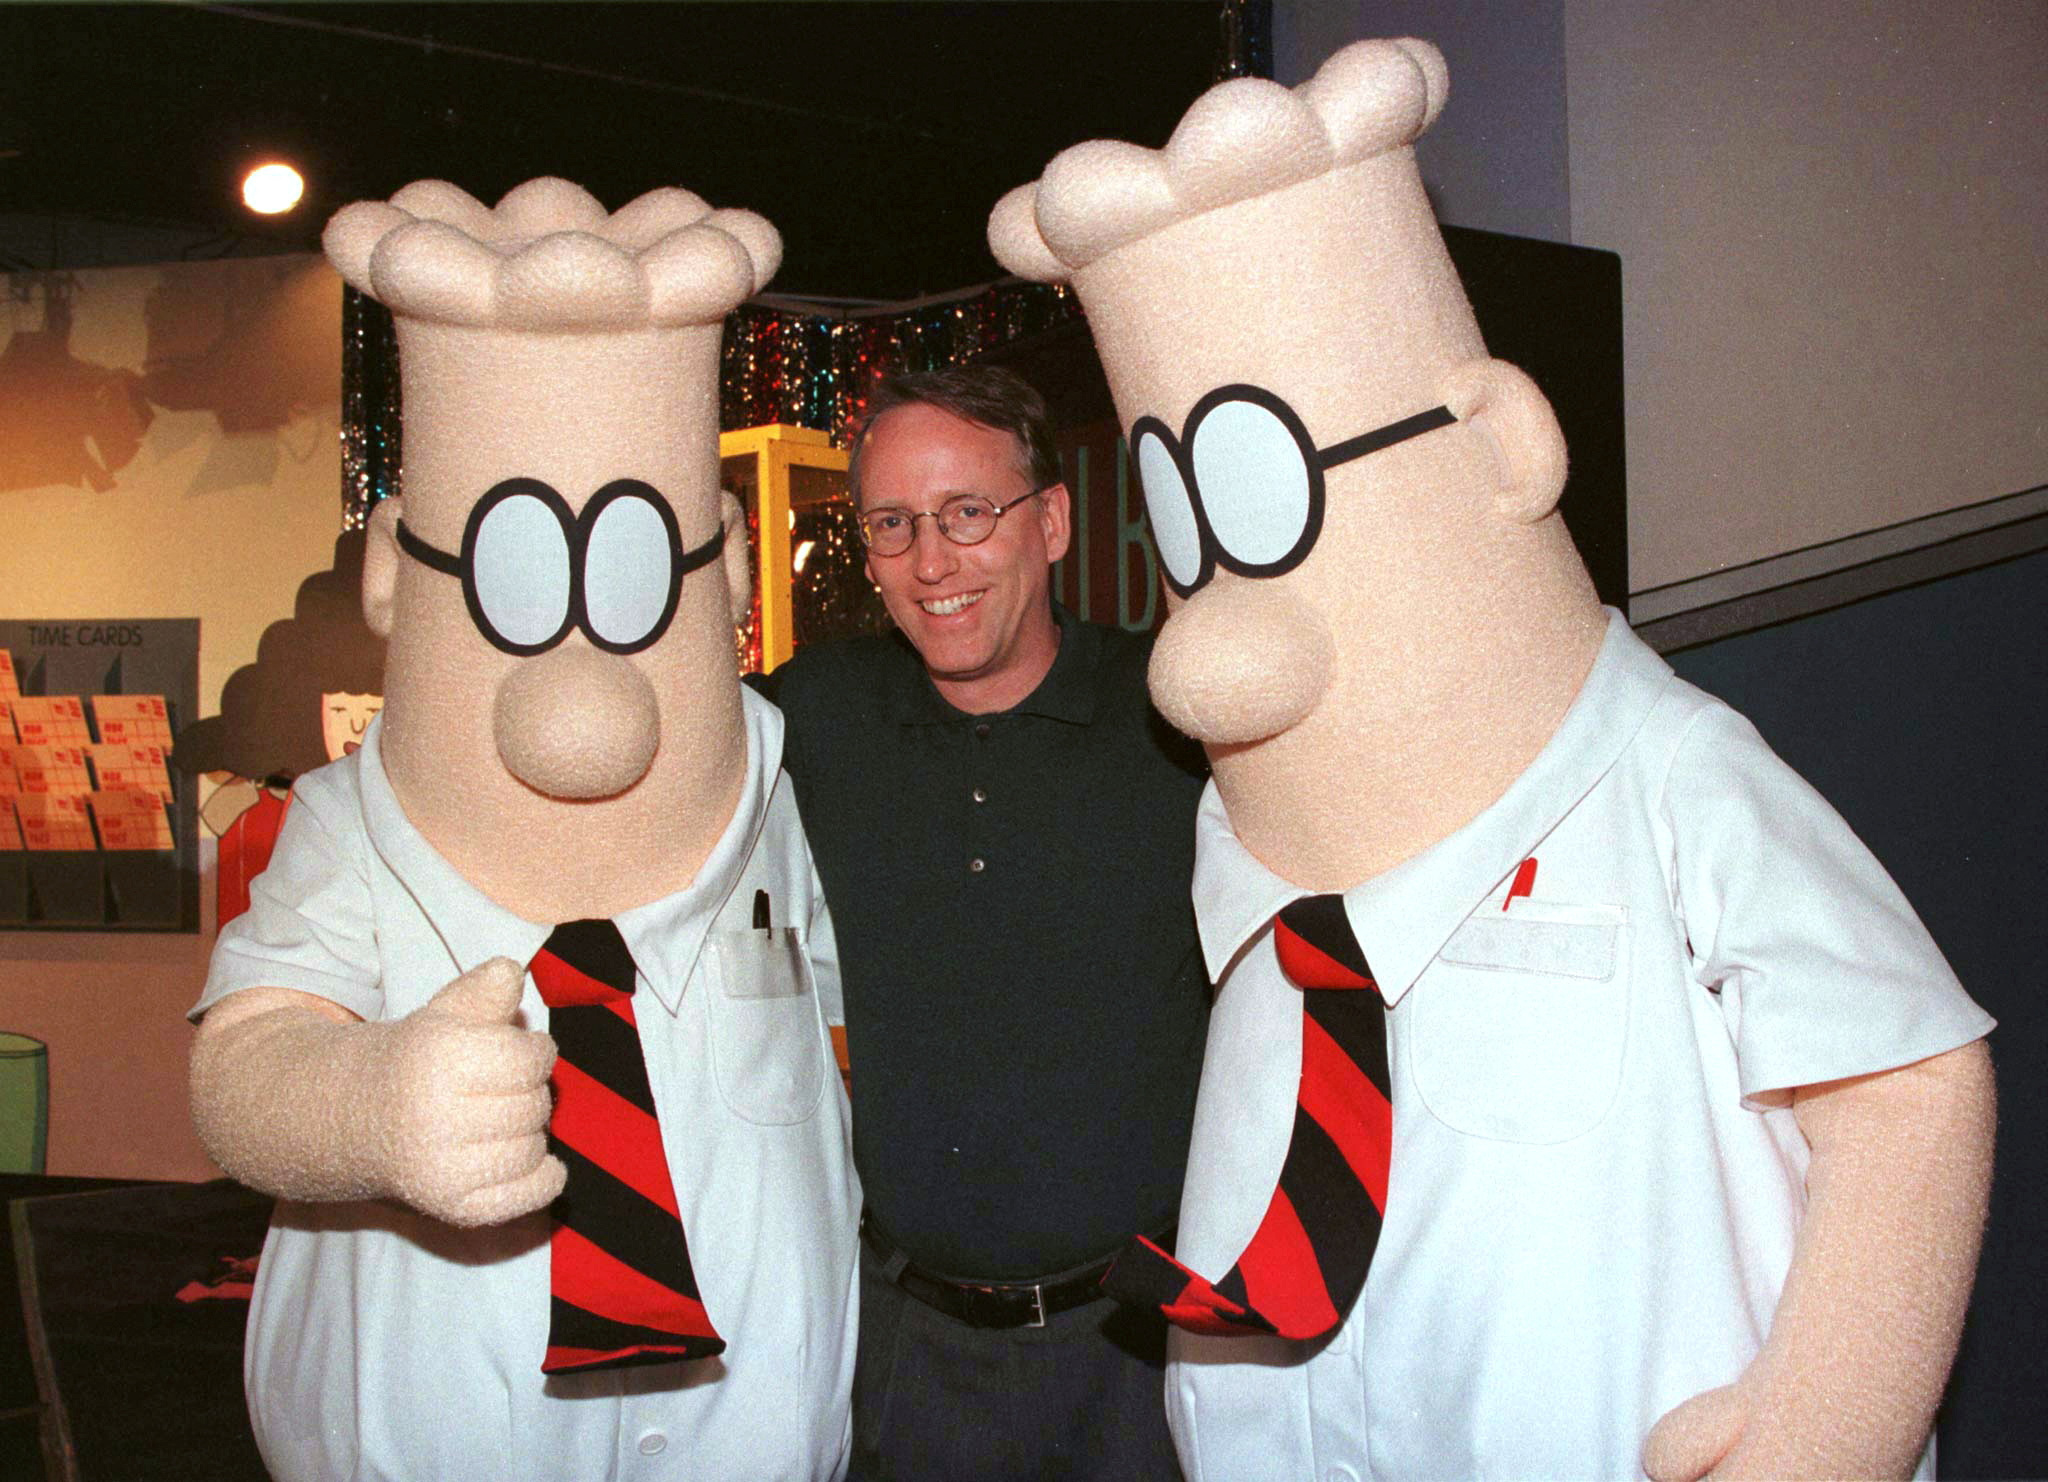 Scott Adams, the creator of "Dilbert", the cartoon character that lampoons the absurdities of corpor..